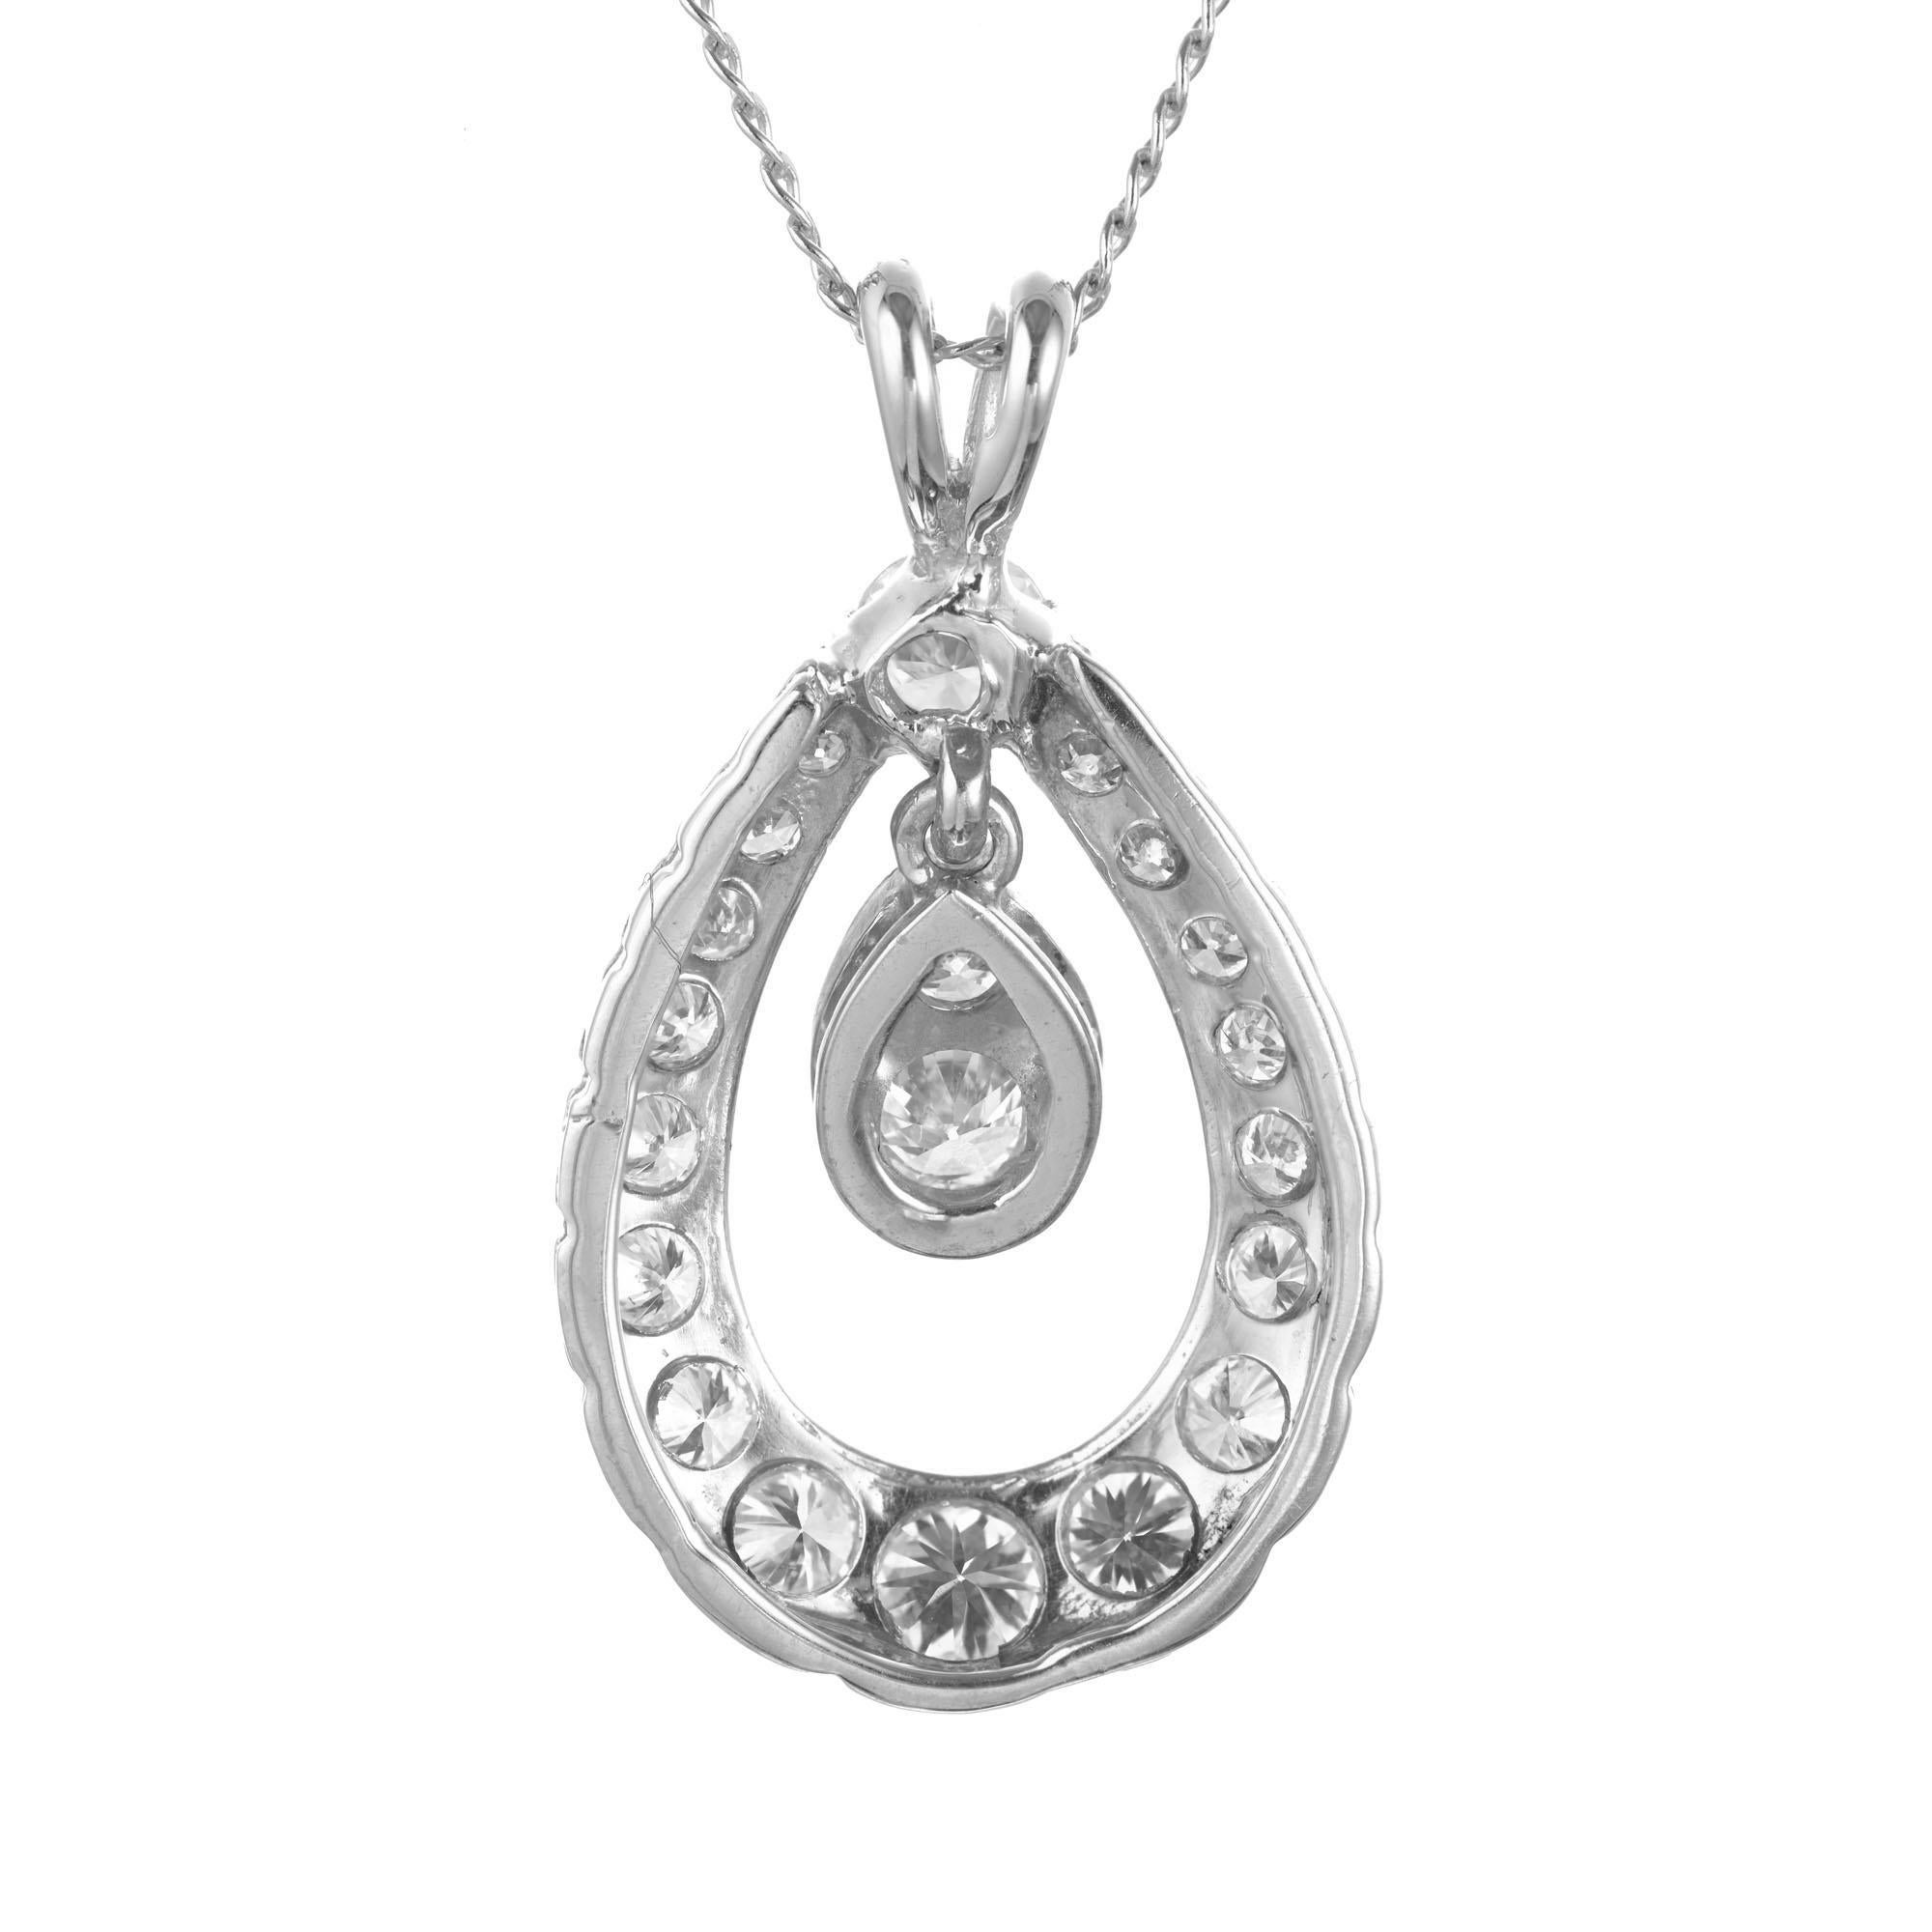 Custom made 1950’s open tear drop shape pendant set with 20 round brilliant cut diamonds in a halo. 14k white gold. Original 16 Inch chain.

20 round brilliant cut diamonds, H-I SI approx. .82cts
14k white gold 
Stamped: 14k
3.2 grams
Top to bottom: